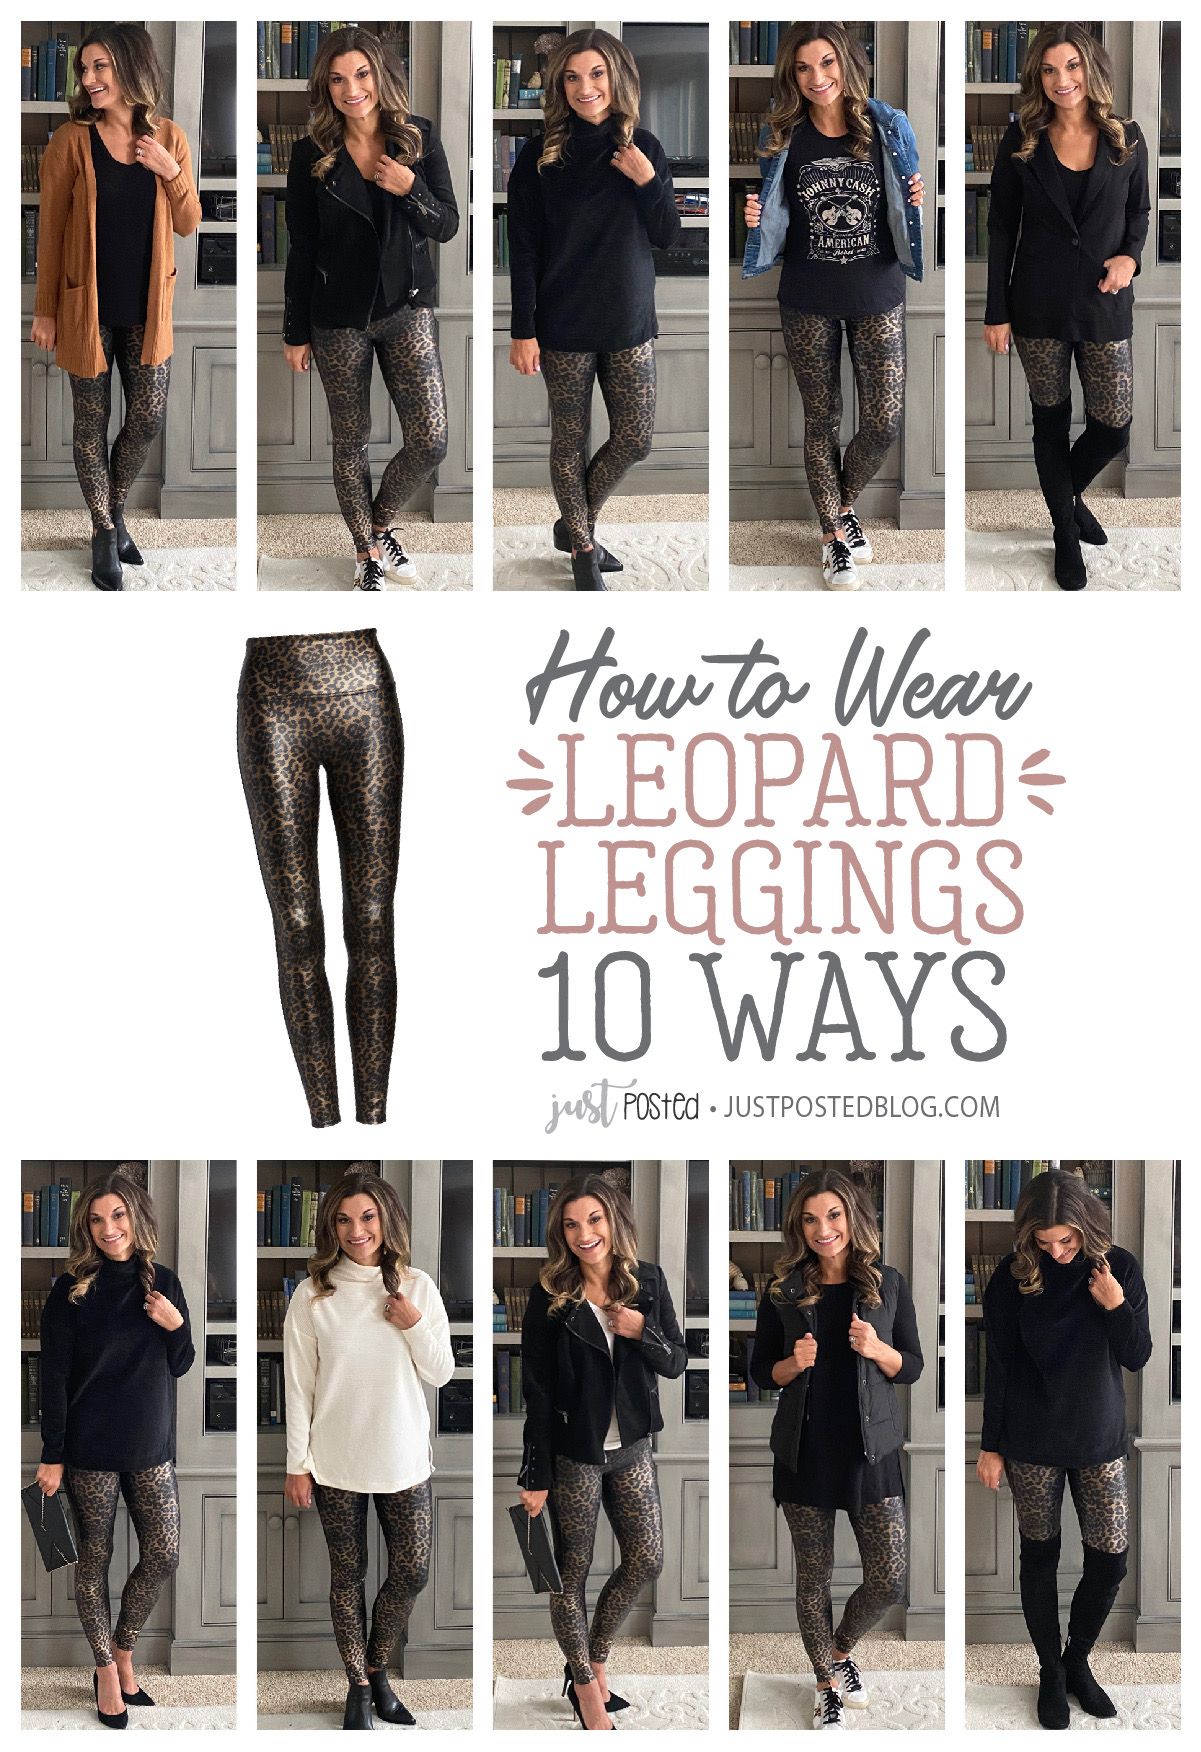 Leopard Leggings Outfits (7 ideas & outfits)